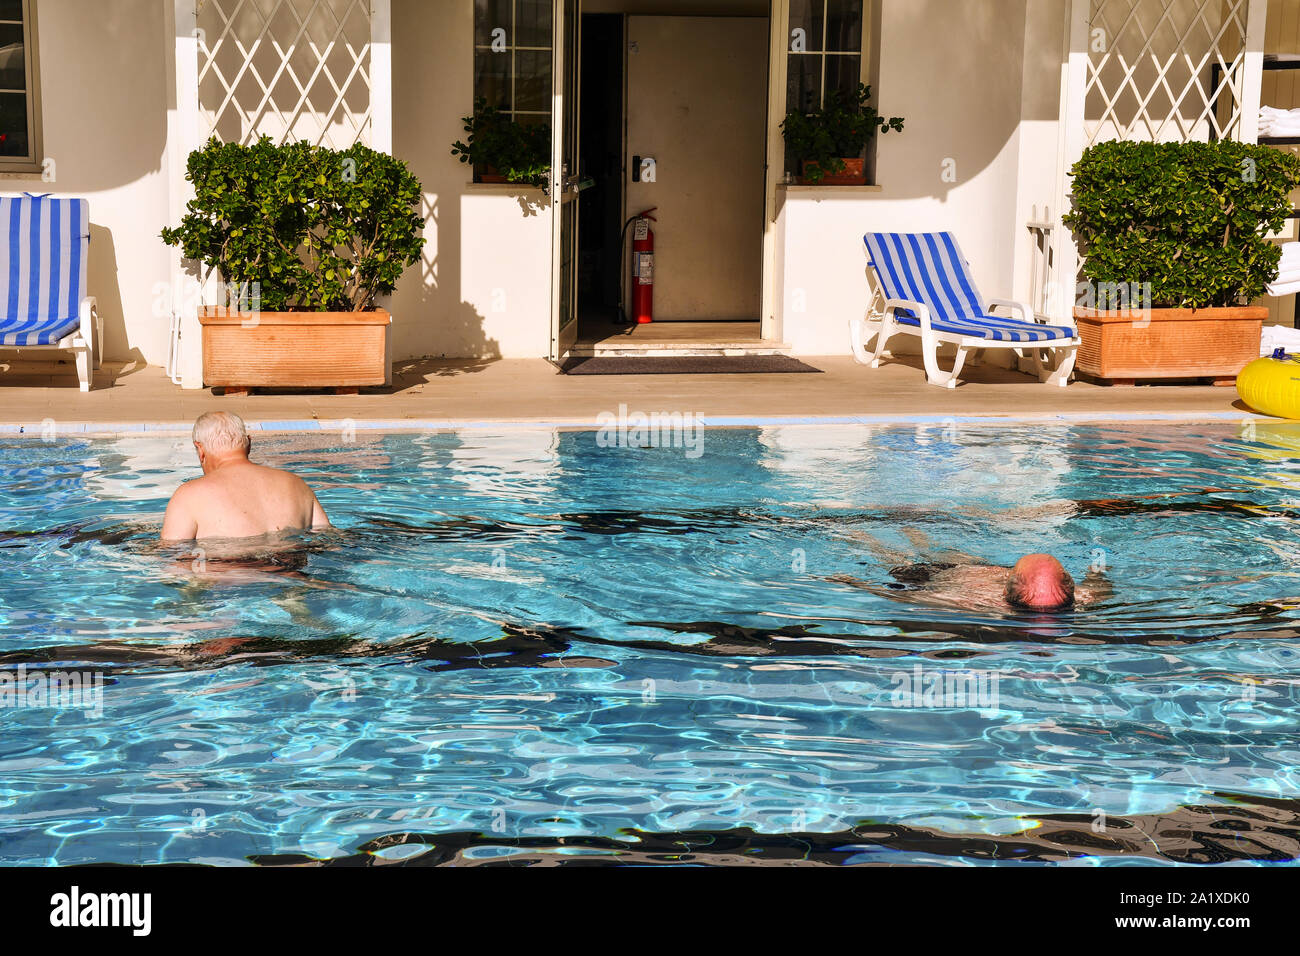 Two senior men from behind swimming in the pool of a hotel in a sunny summer day, Lido di Camaiore, Versilia, Tuscany, Italy Stock Photo